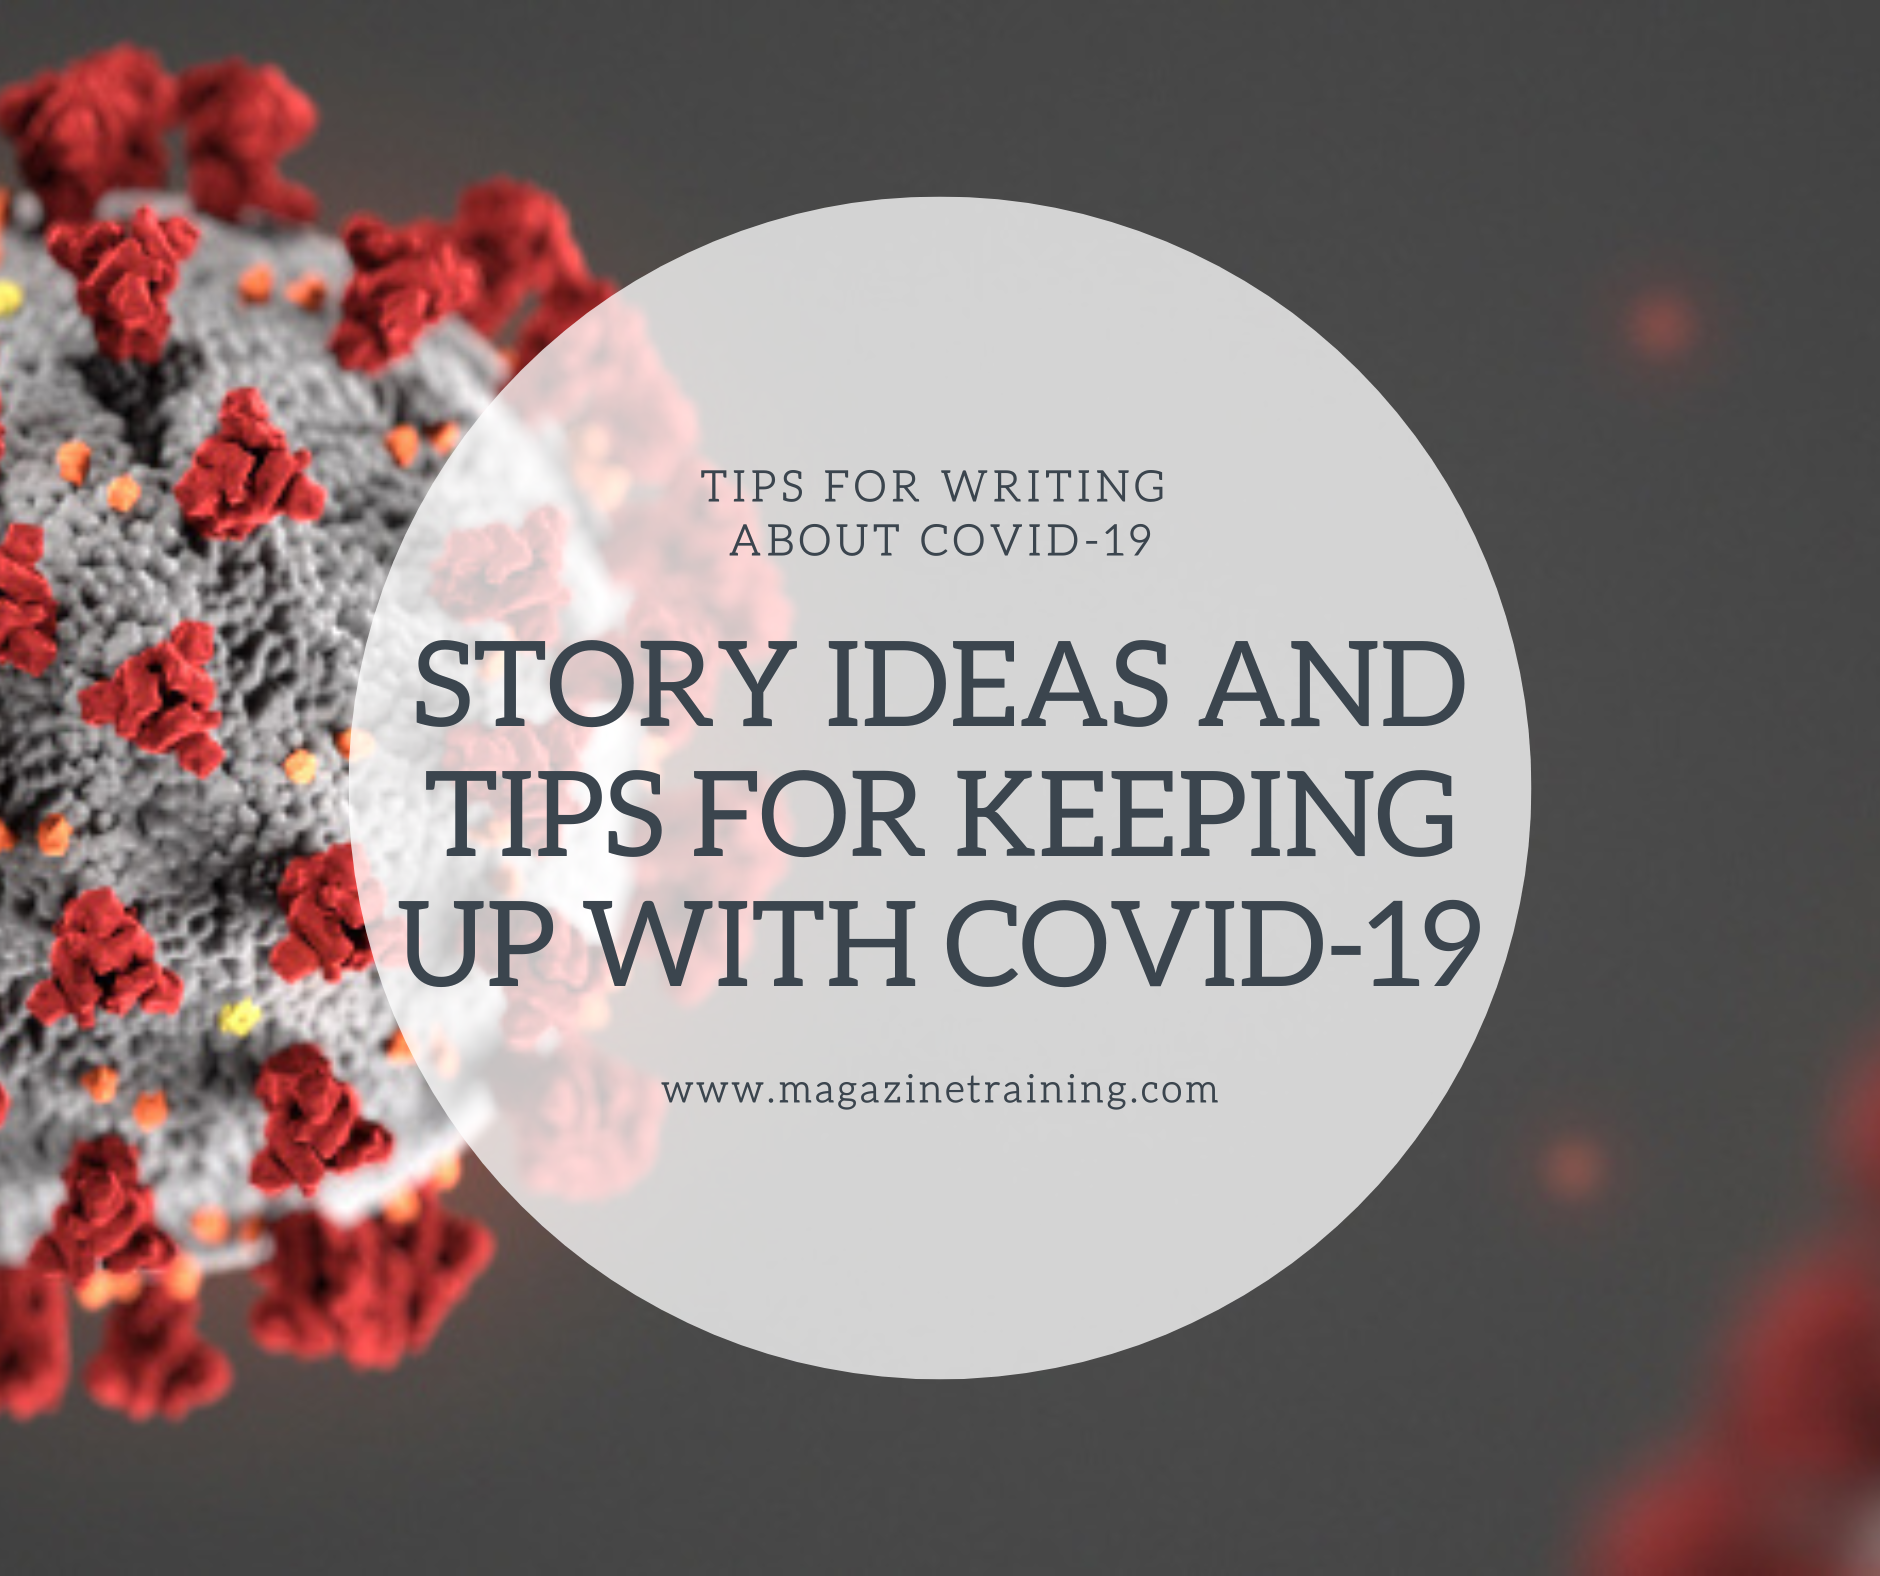 COVID stories and ideas